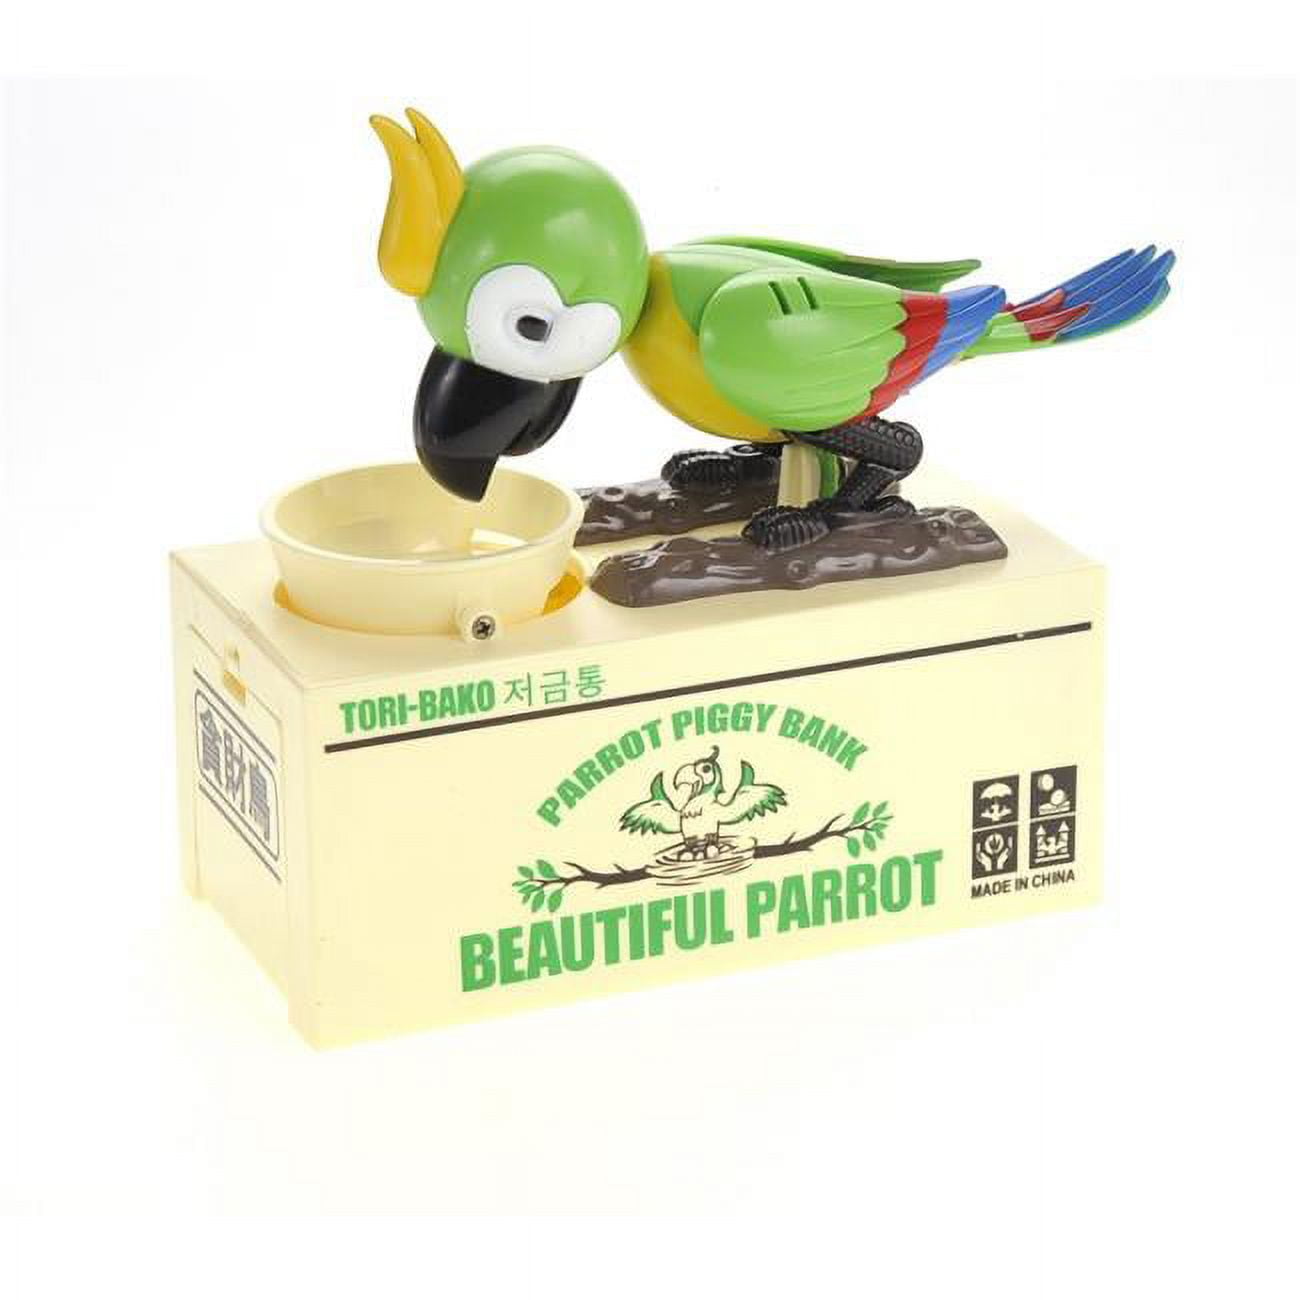 Picture of Azimport MPT501 Green Cute Parrot Piggy Bank - Green